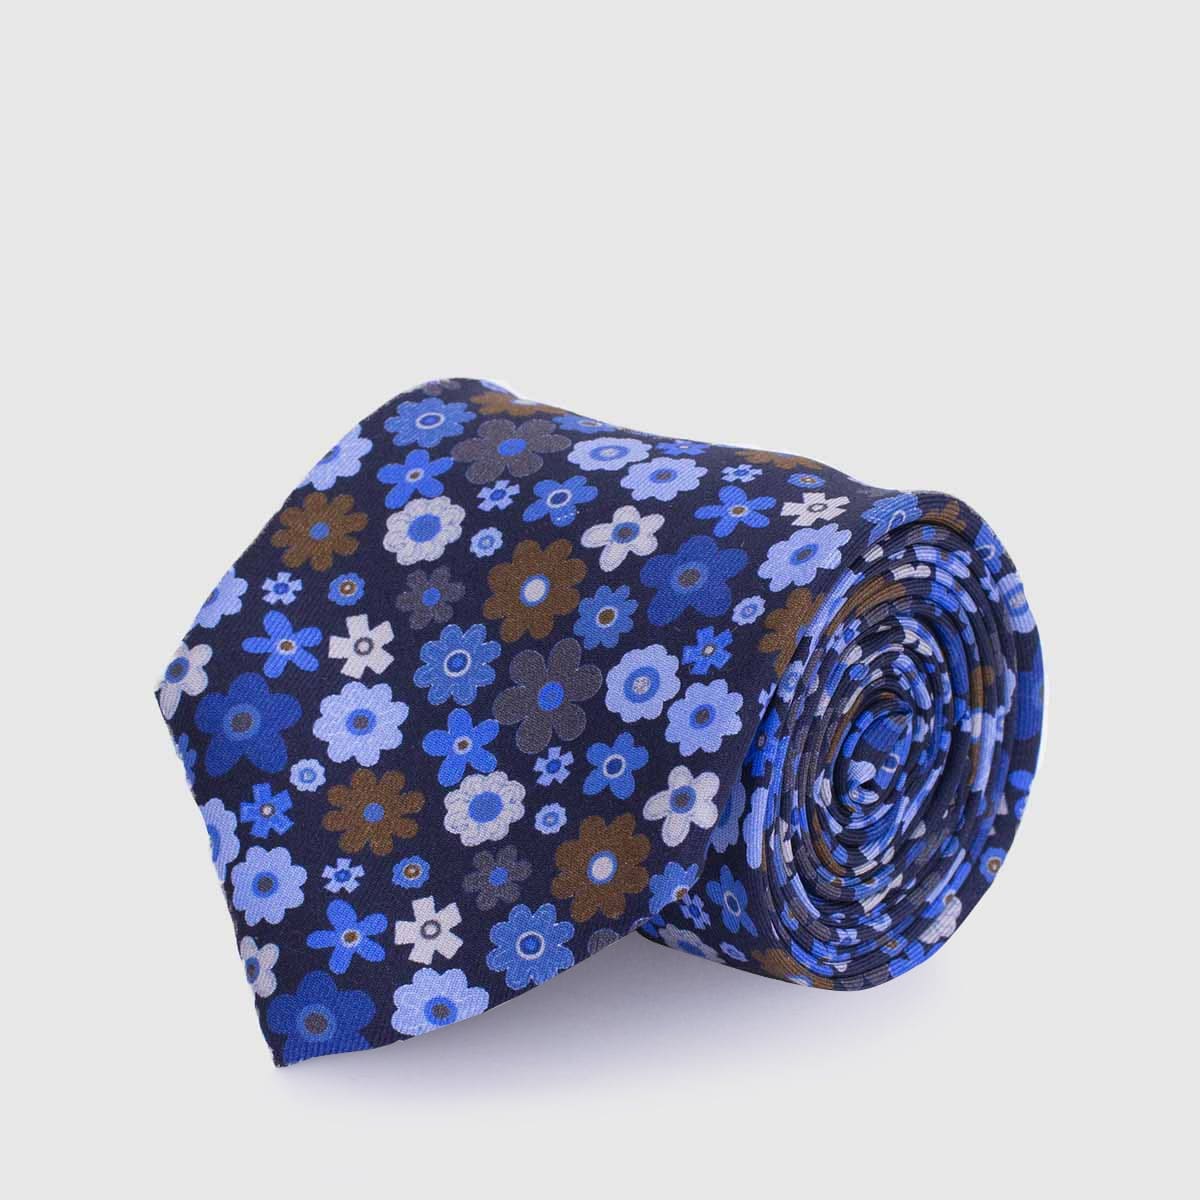 100% 5 Fold Silk Tie in a blue background and flowers Fumagalli 1891 on sale 2022